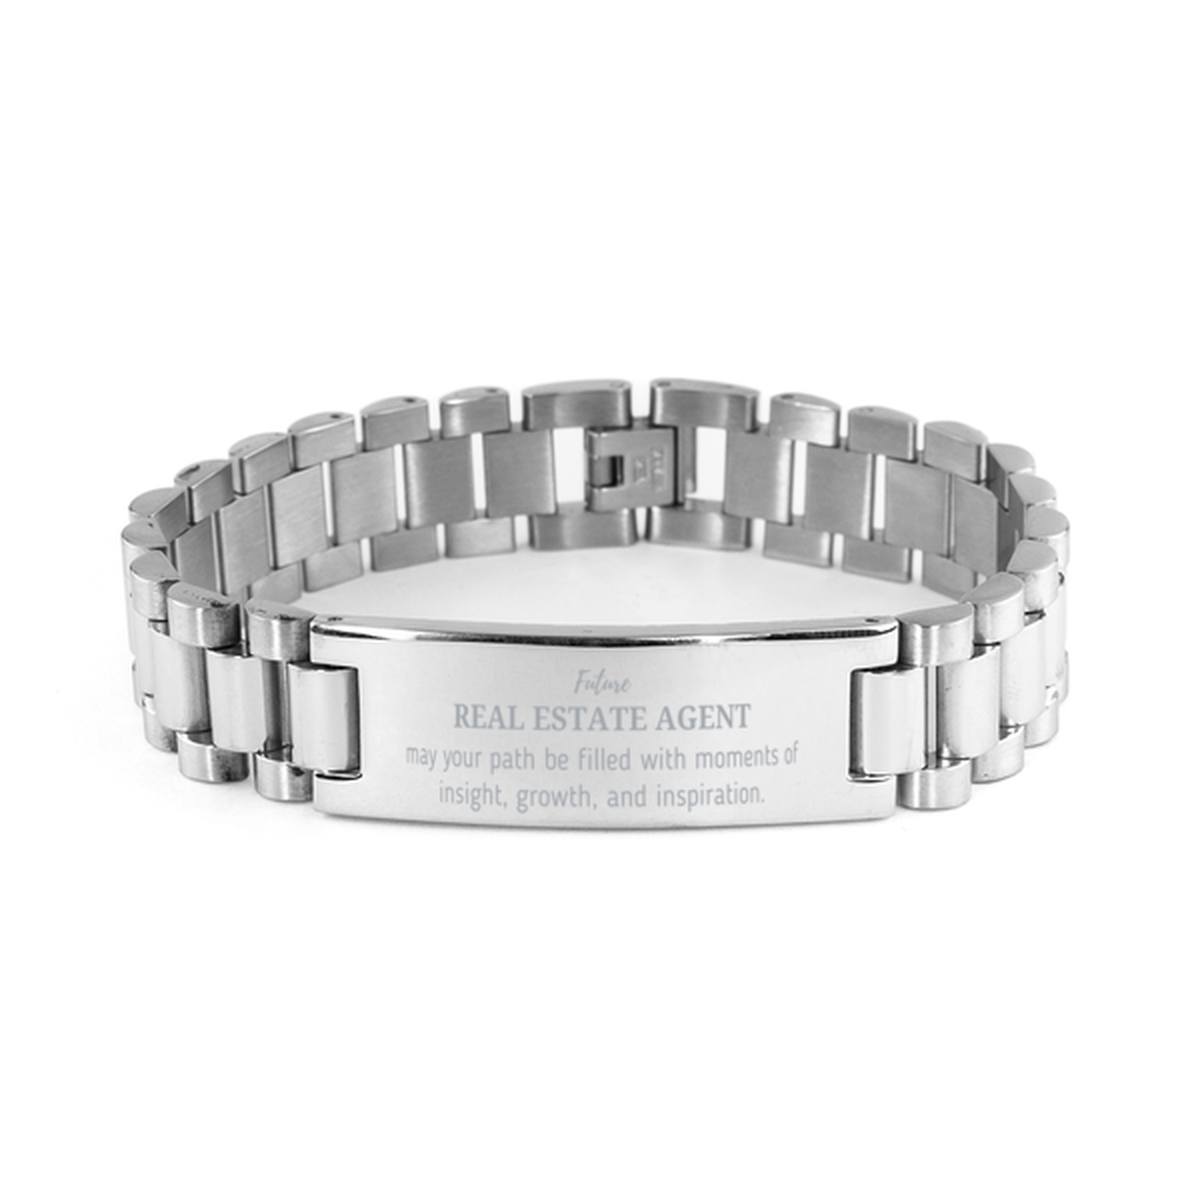 Future Real Estate Agent Gifts, May your path be filled with moments of insight, Graduation Gifts for New Real Estate Agent, Christmas Unique Ladder Stainless Steel Bracelet For Men, Women, Friends